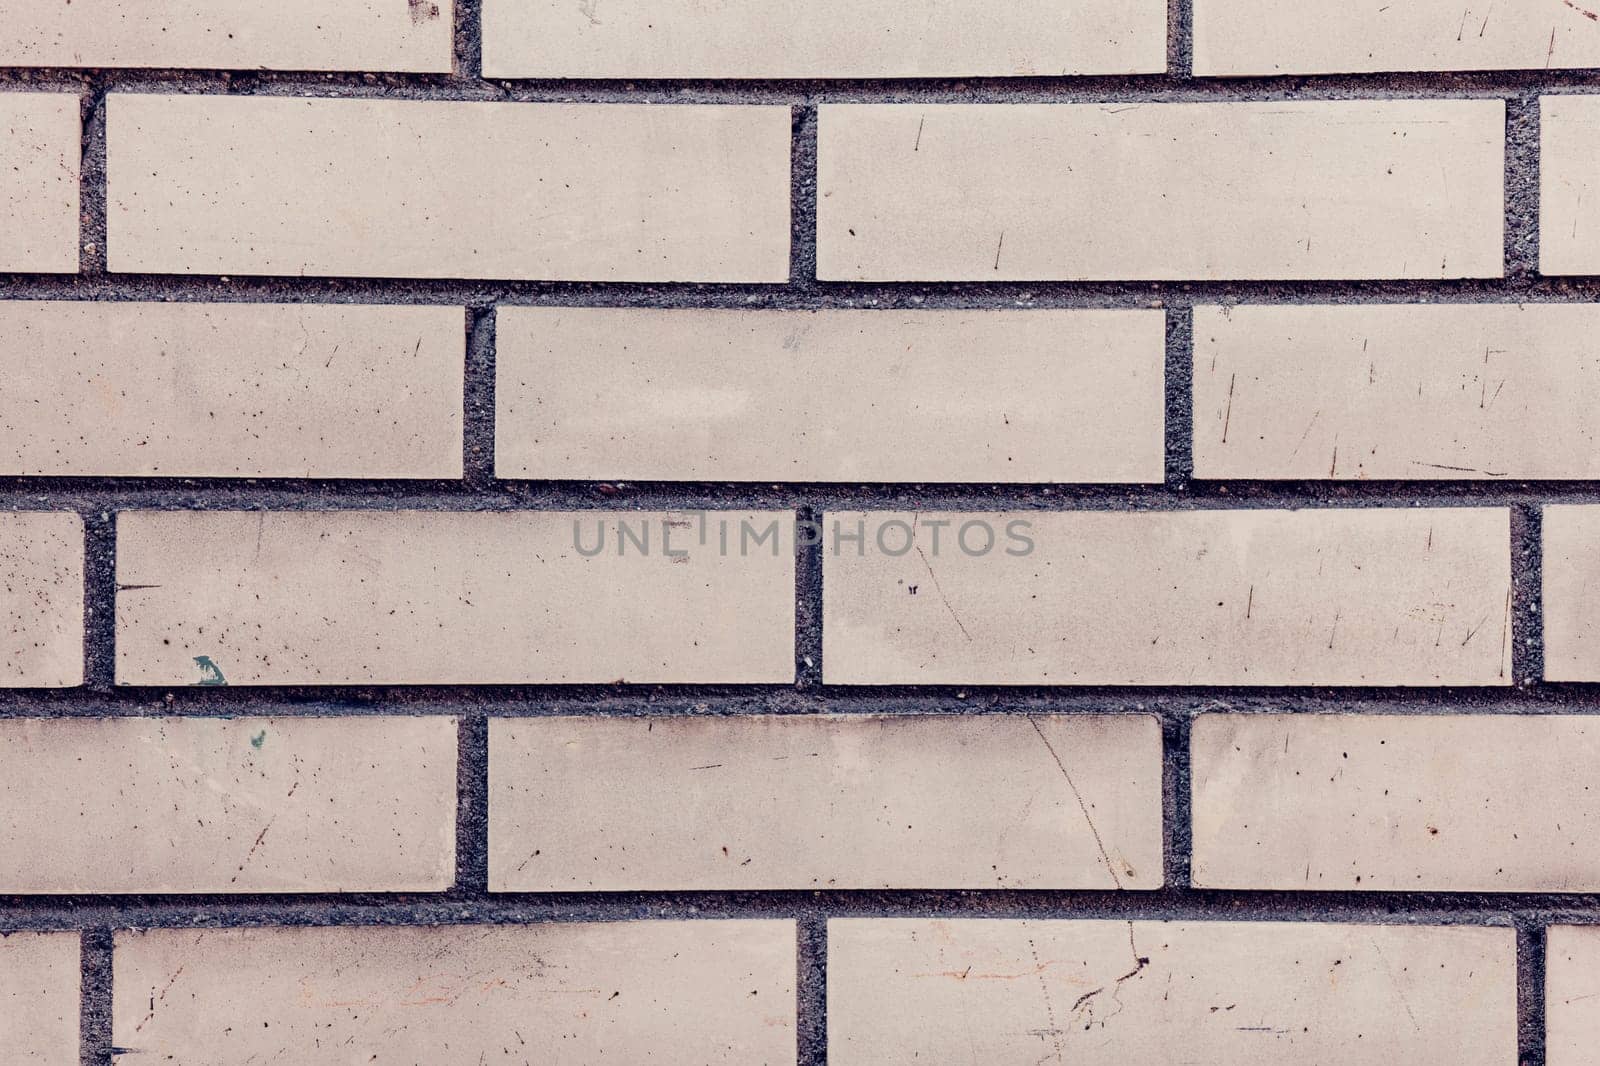 brick wall background of white abstract style.